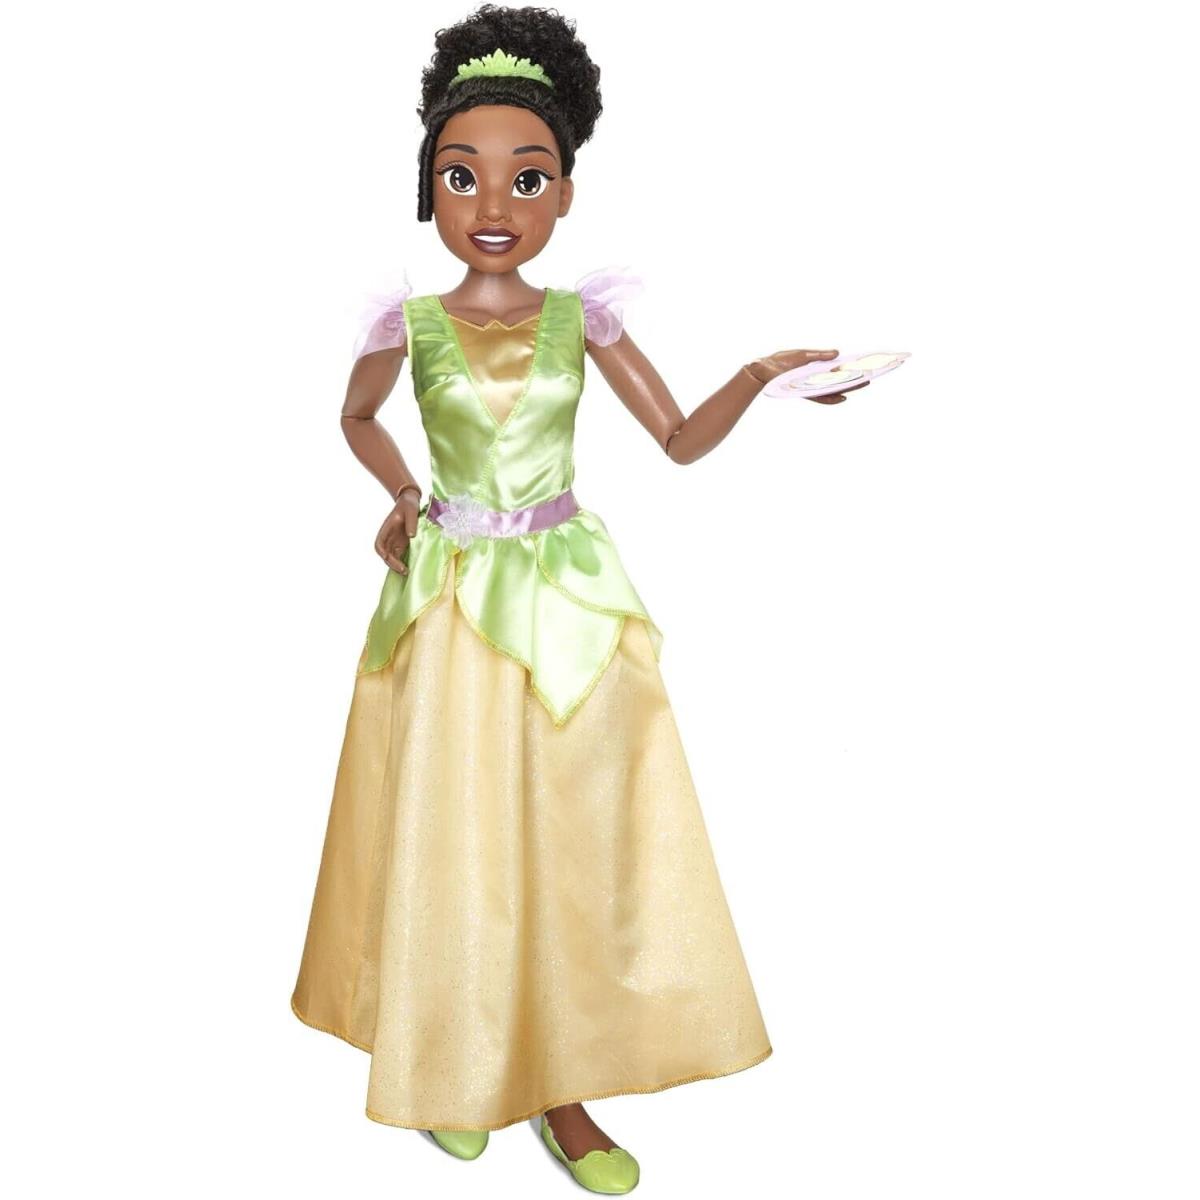 Disney Princess Playdate Tiana Doll 32 Tall Poseable with Baking Accessories